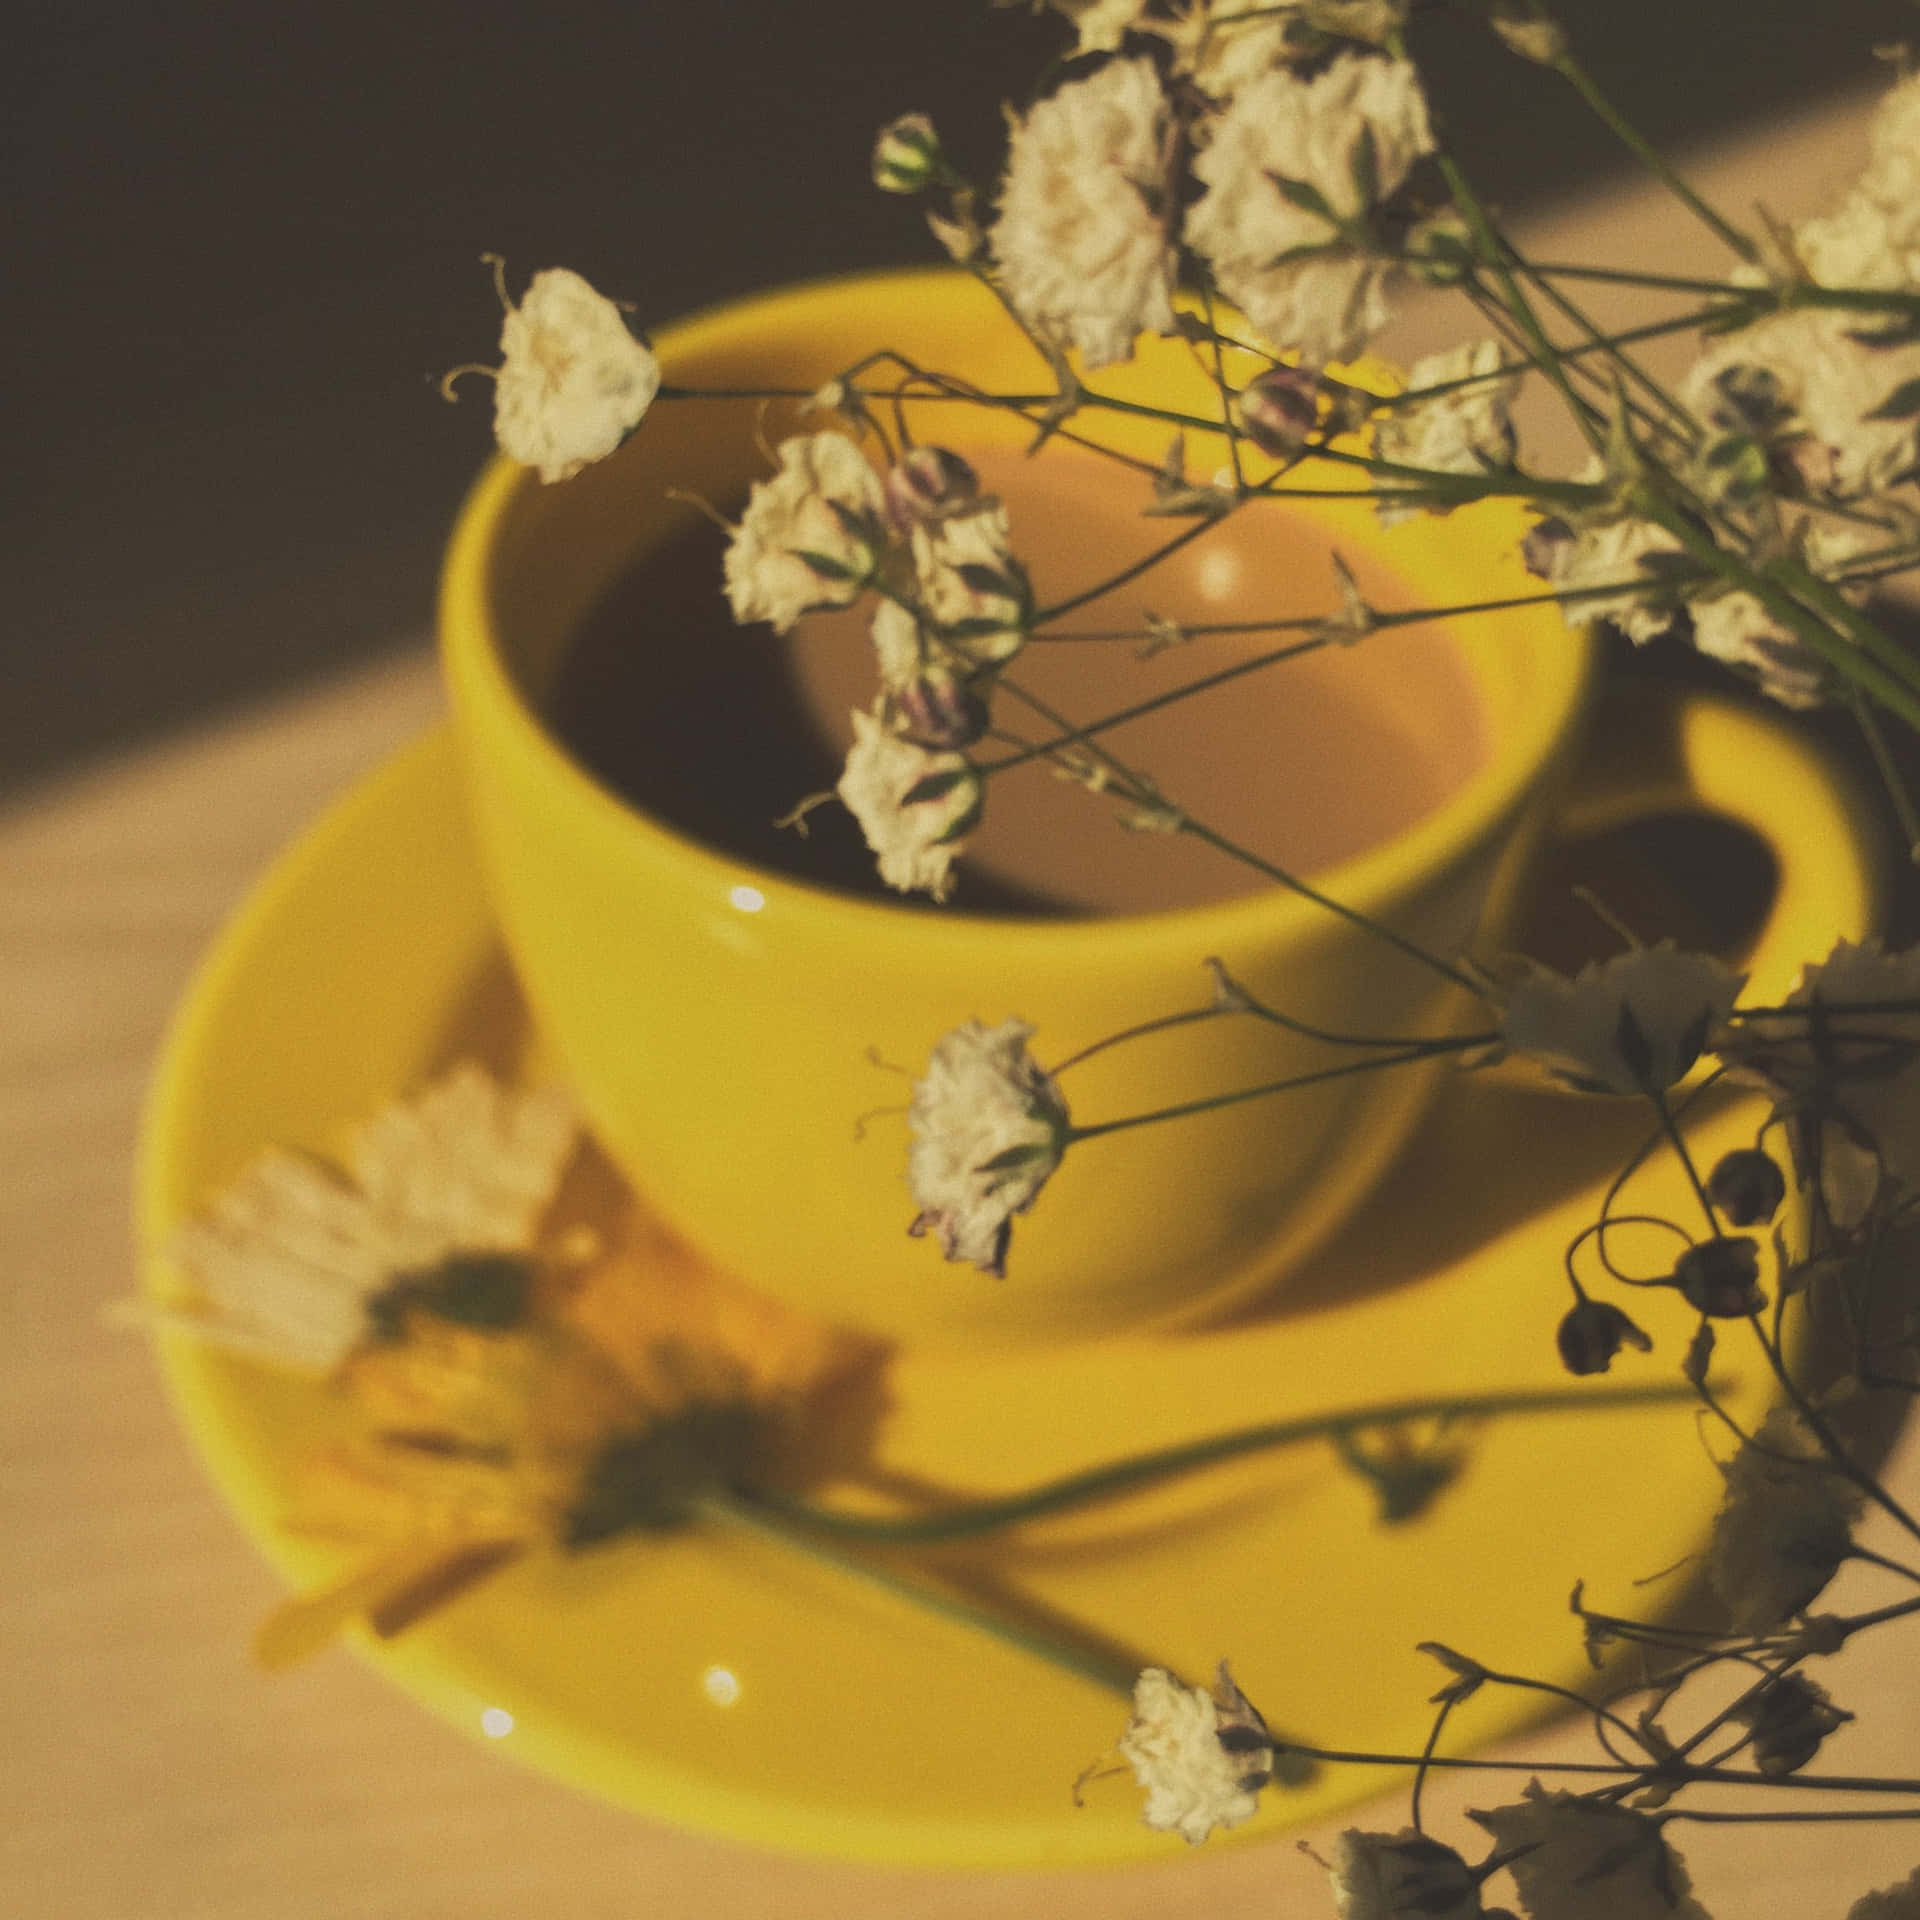 Vintage Yellow Cup With Dried Flowers Wallpaper